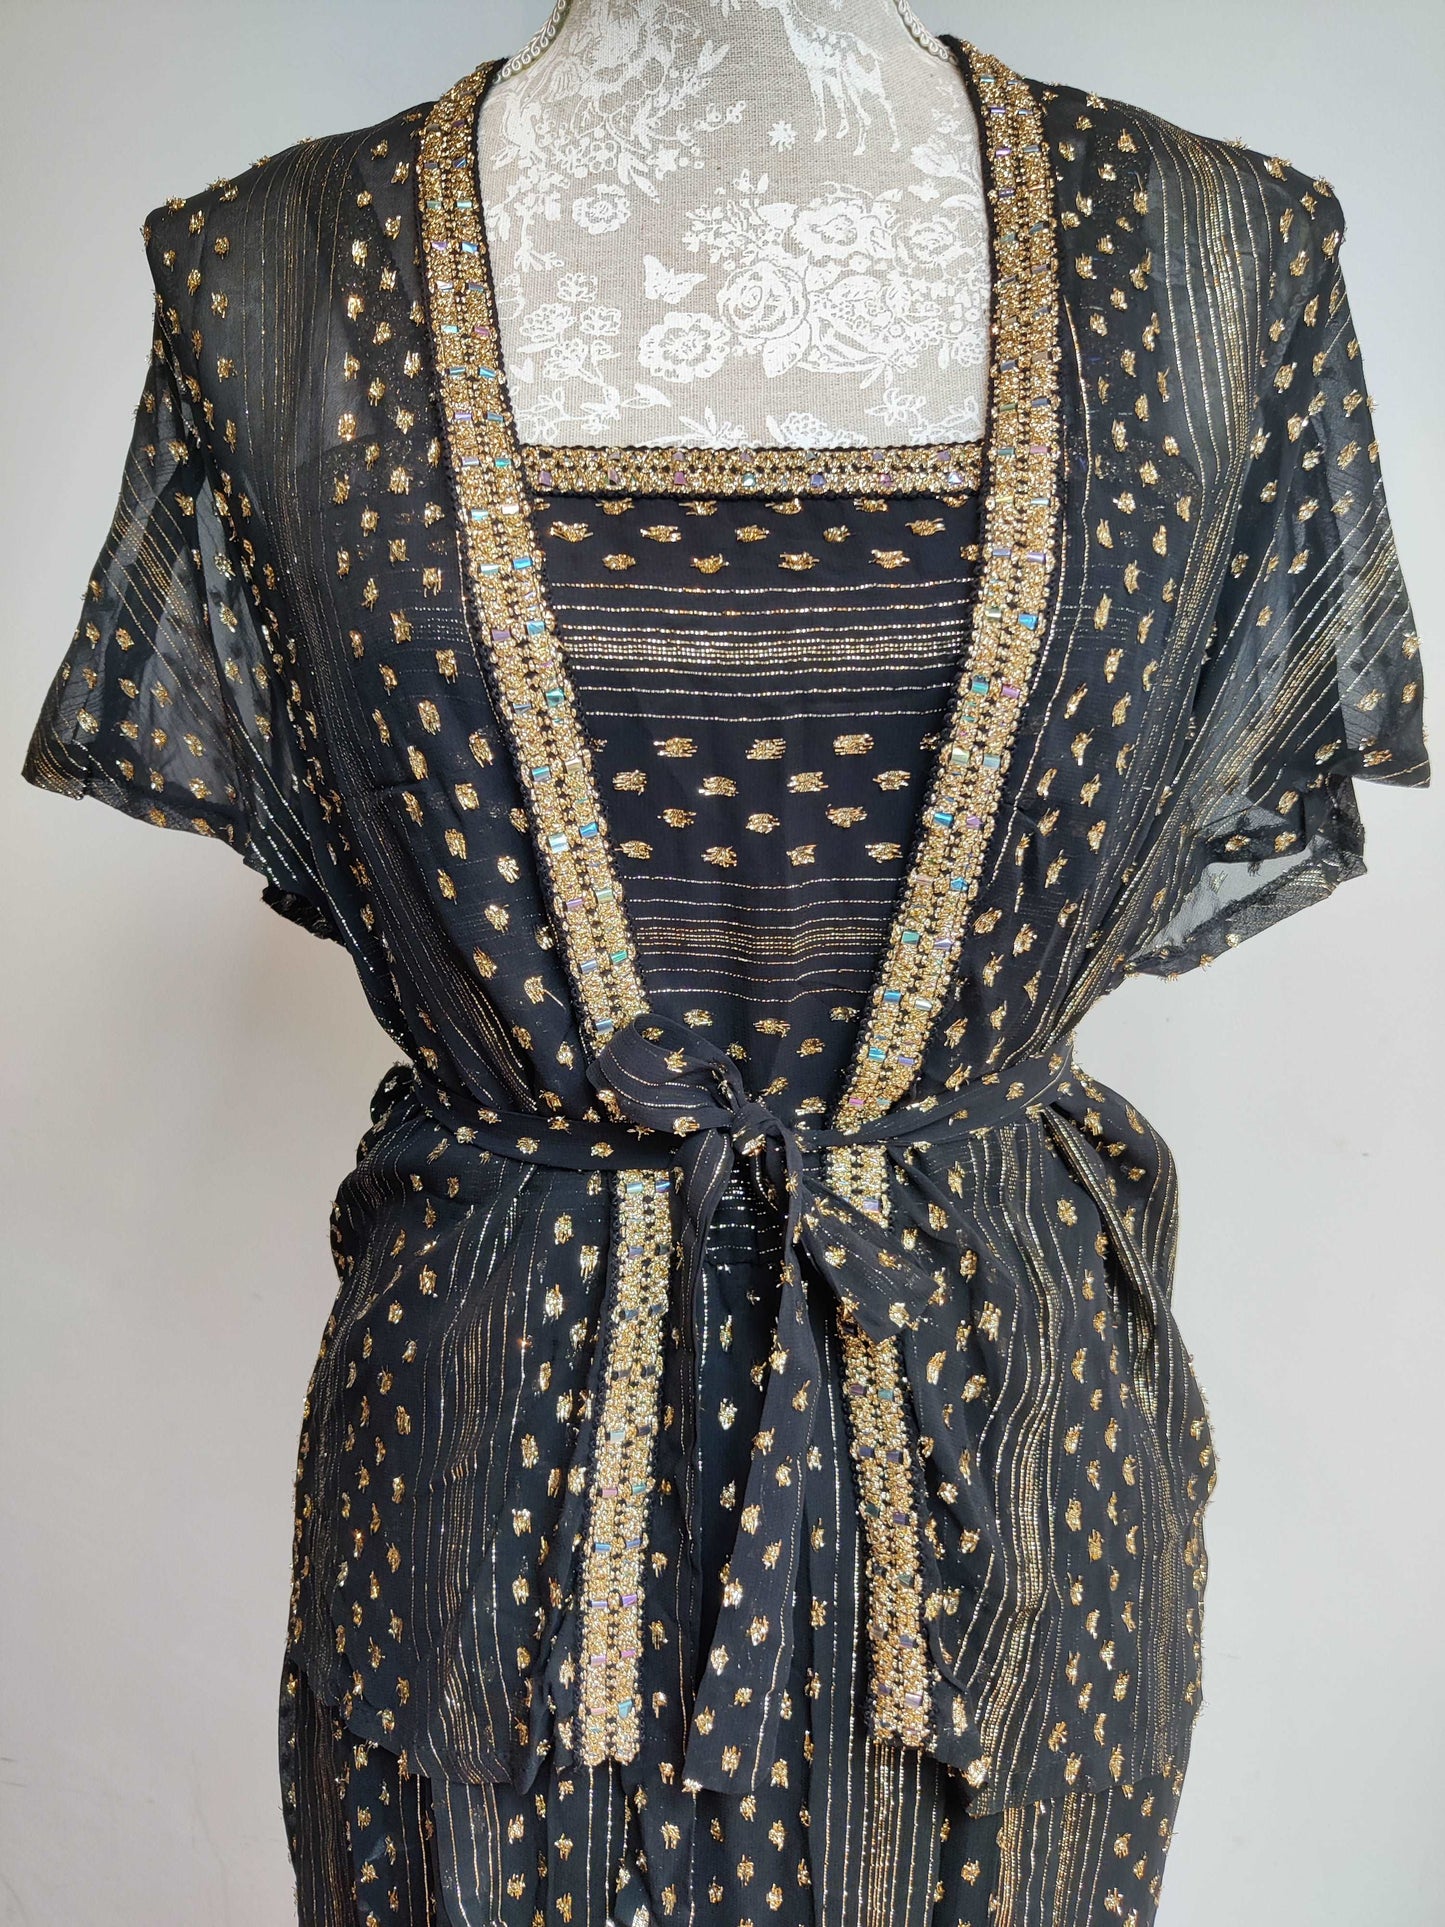 Black and gold co-ord set with beaded detail.